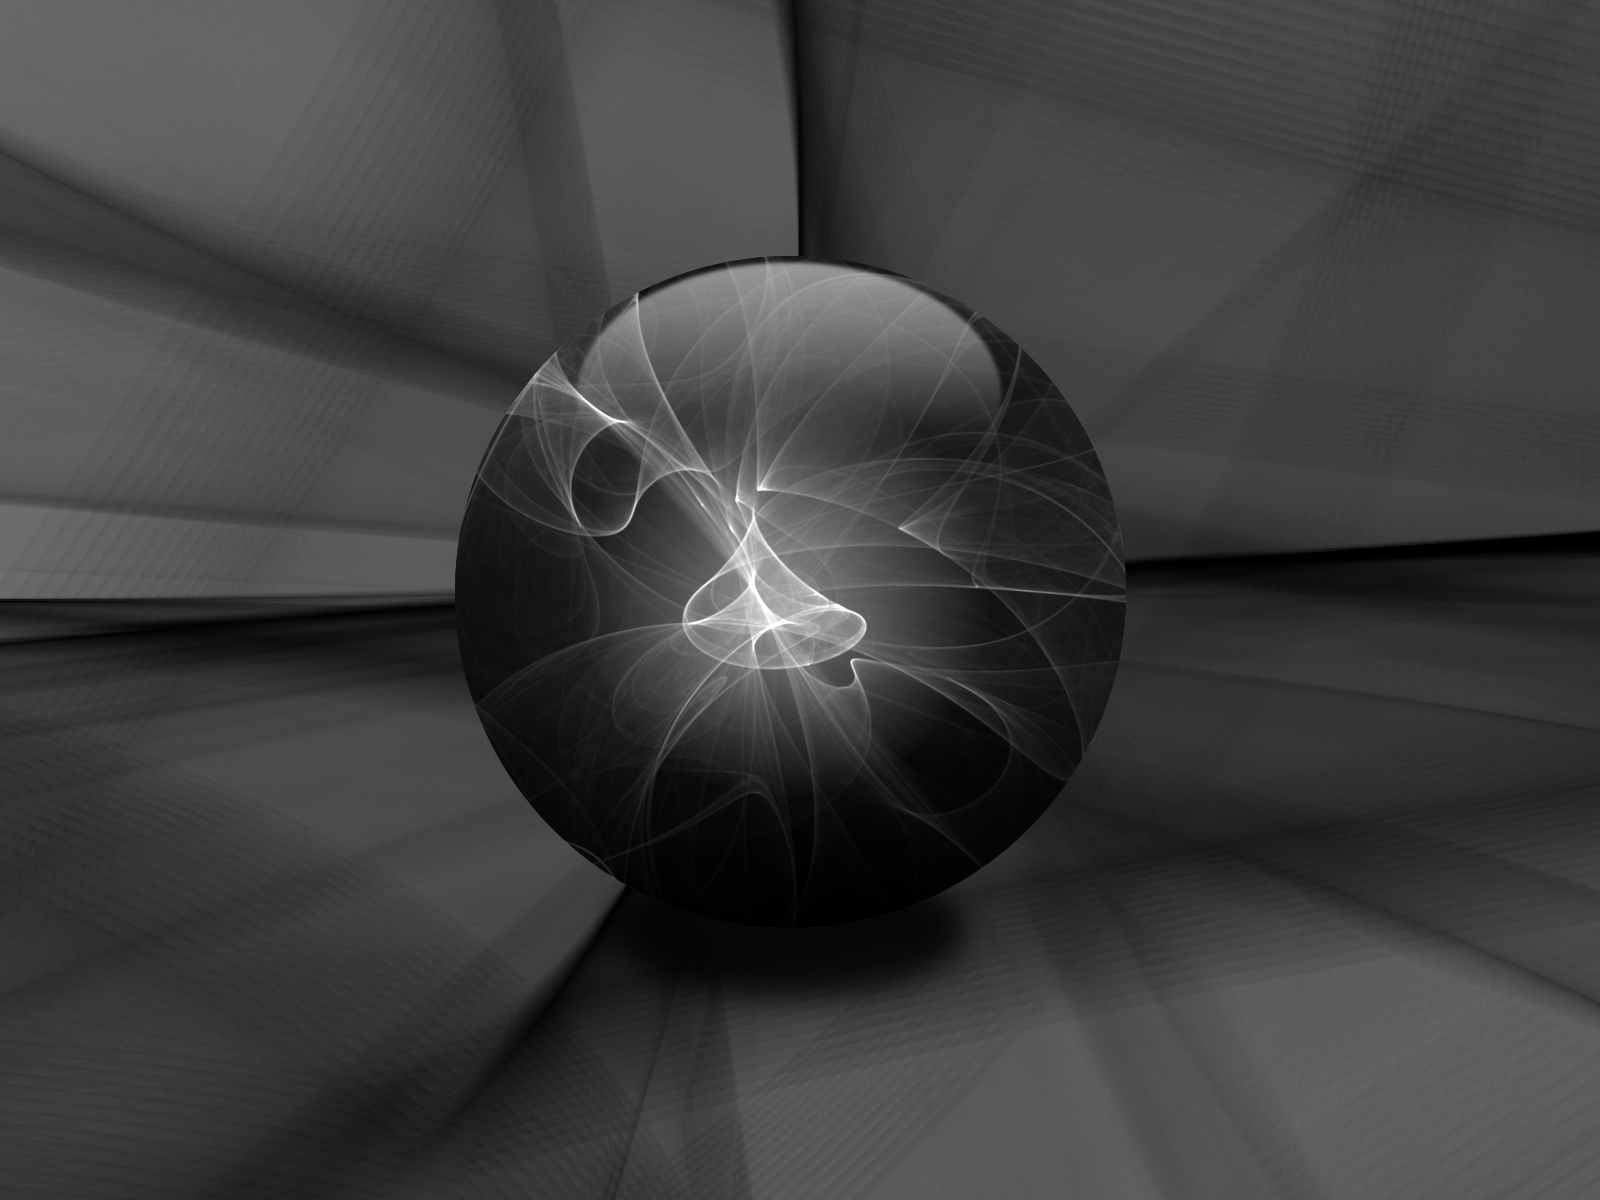 dark, abstract, cgi, ball wallpapers for tablet